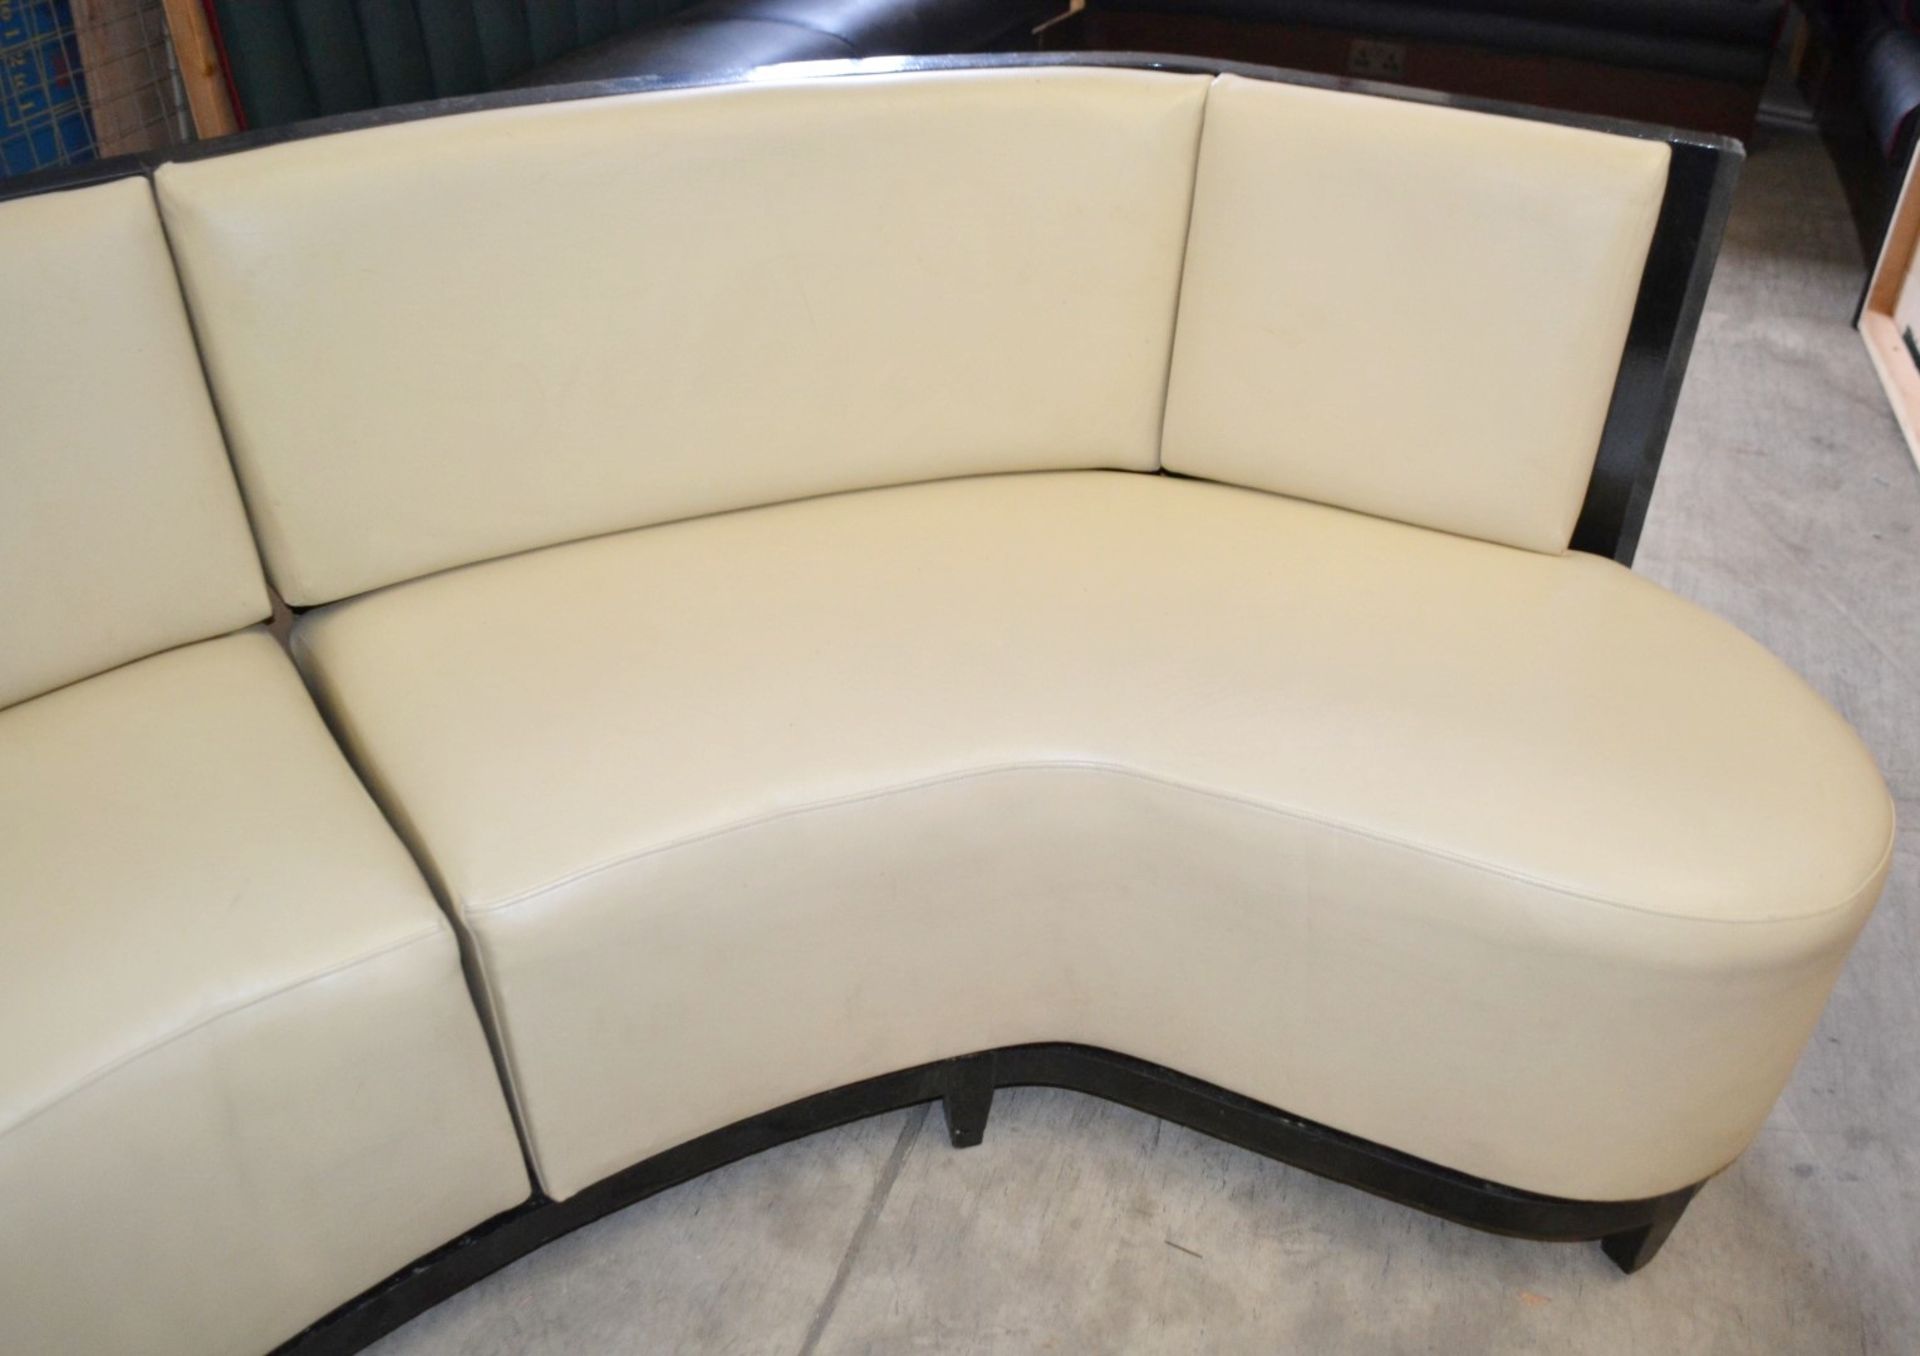 5 x Assorted Sections Of Curved Commercial Seating Upholstered In A Cream Faux Leather - Image 11 of 23